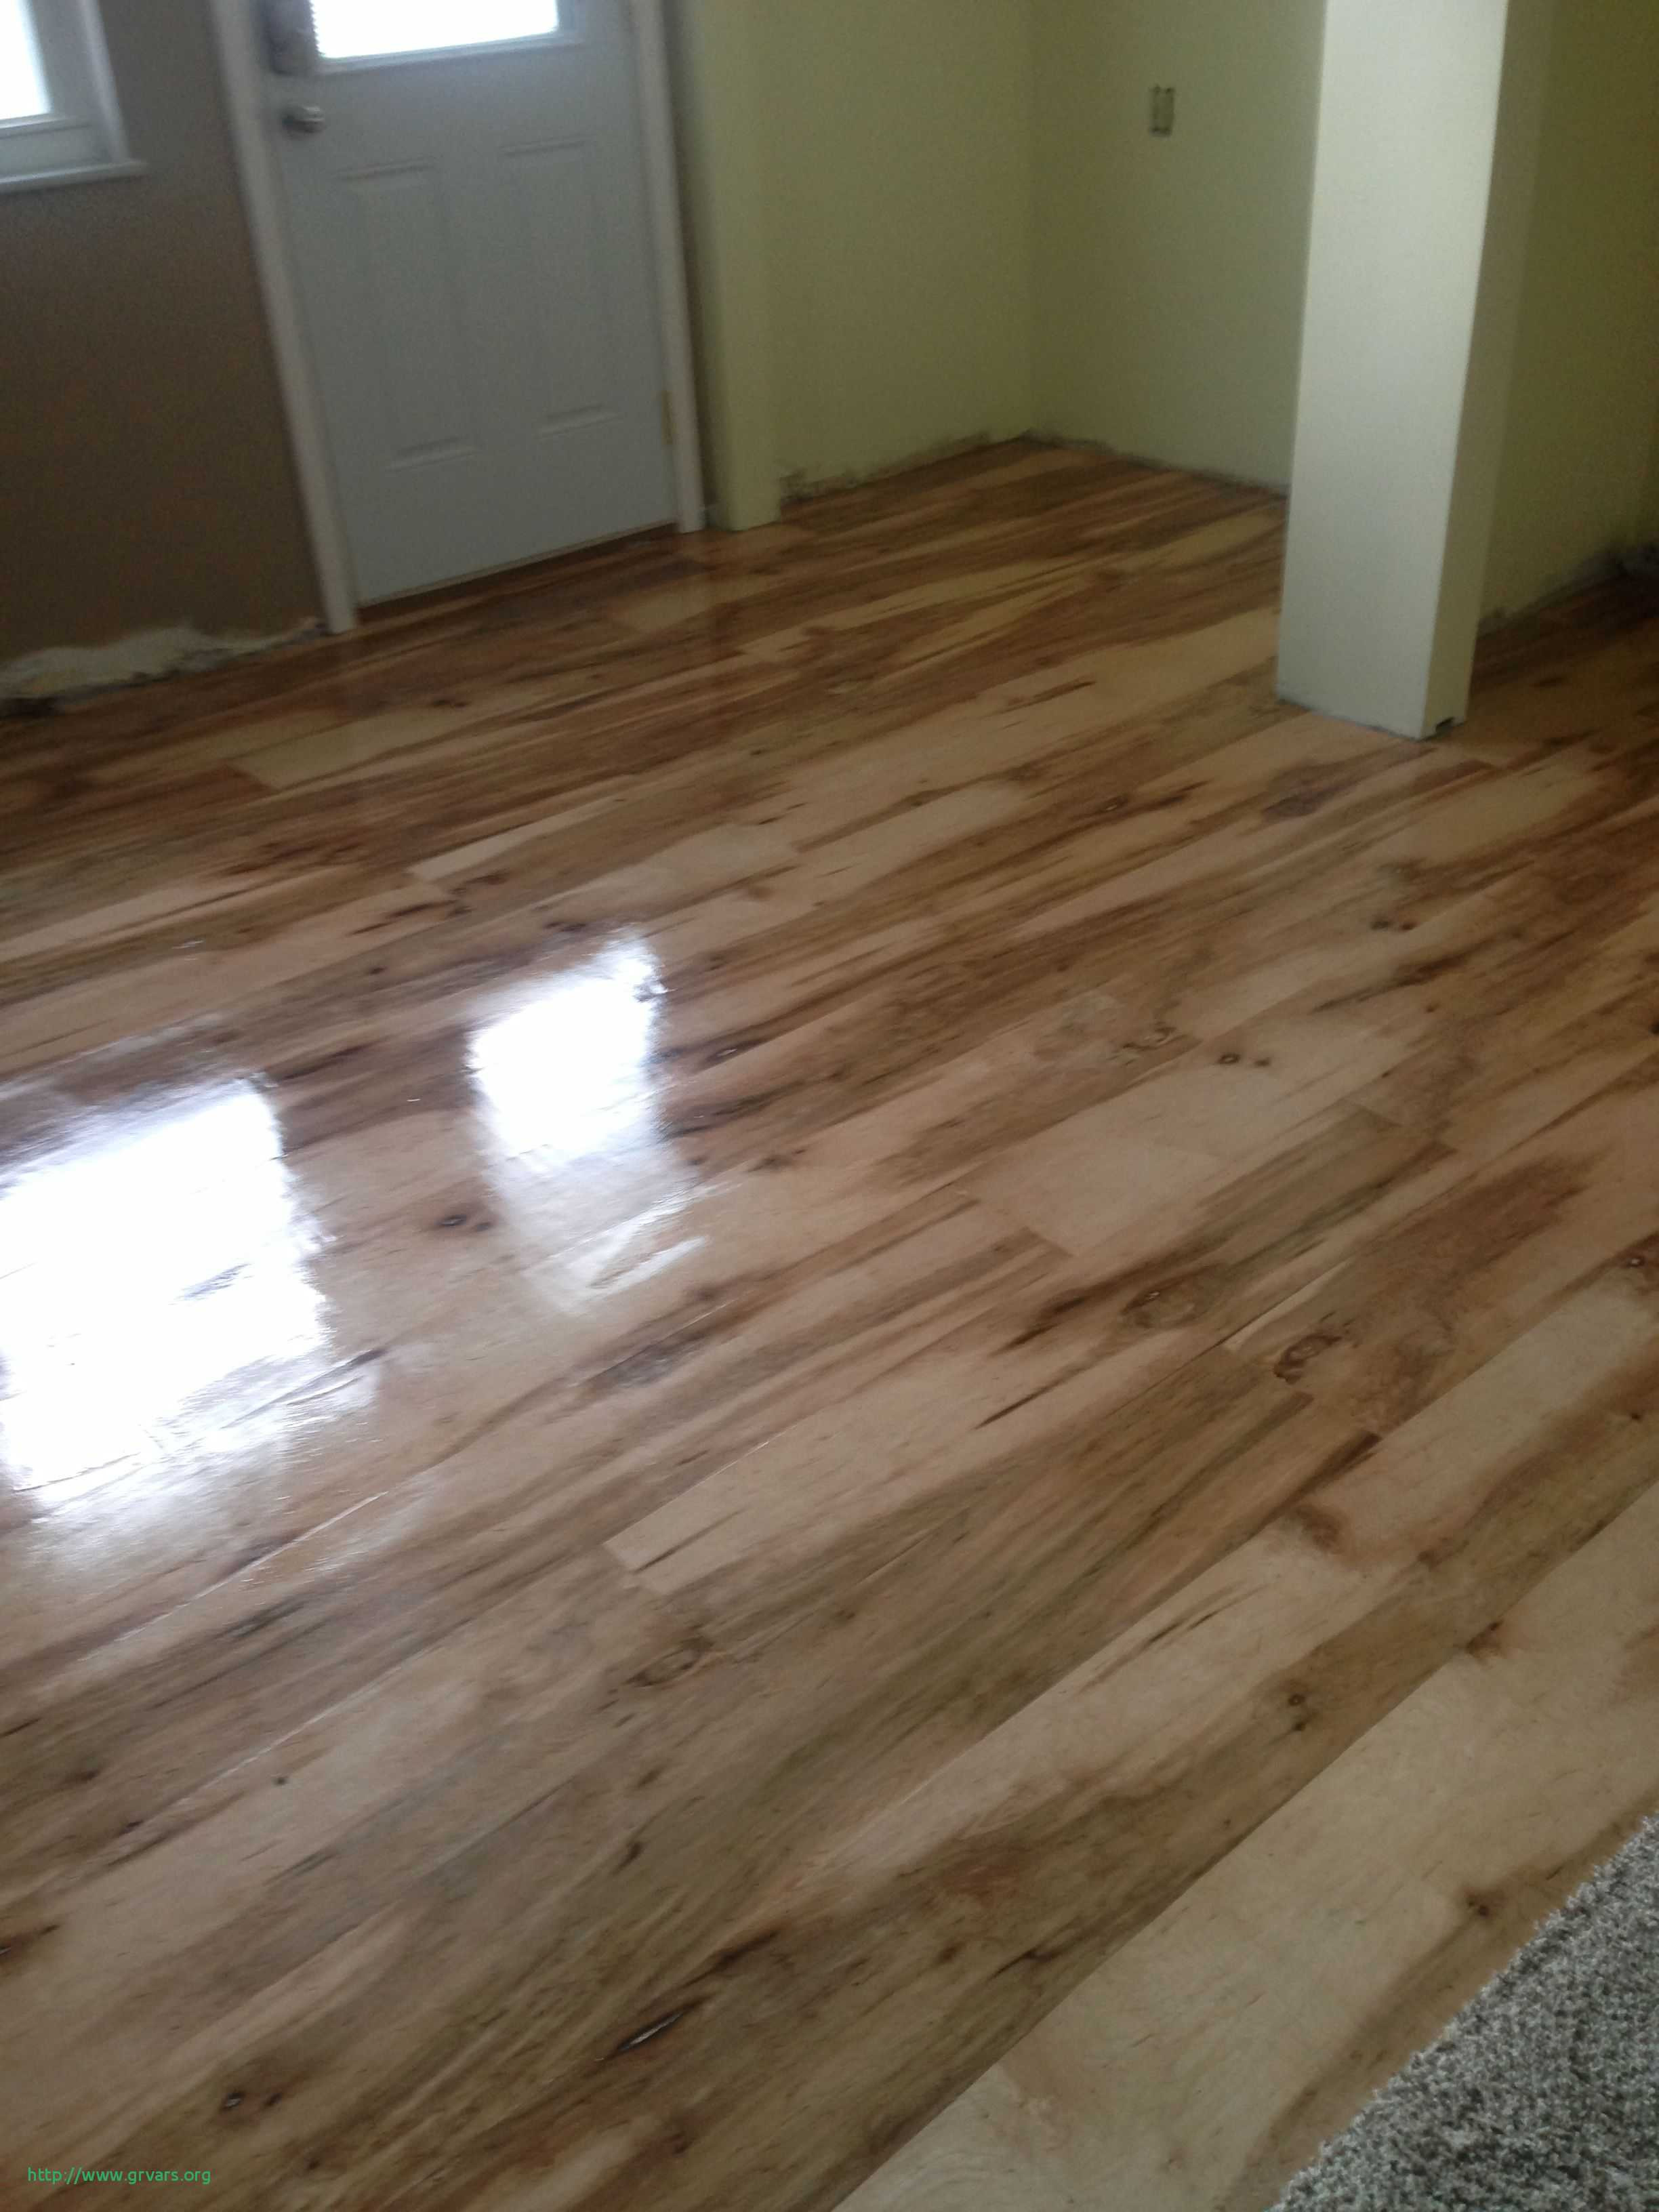 29 Best Hardwood Flooring Quality Reviews 2022 free download hardwood flooring quality reviews of 21 inspirant best prices for laminate wood flooring ideas blog with regard to best prices for laminate wood flooring unique engaging discount hardwood fl